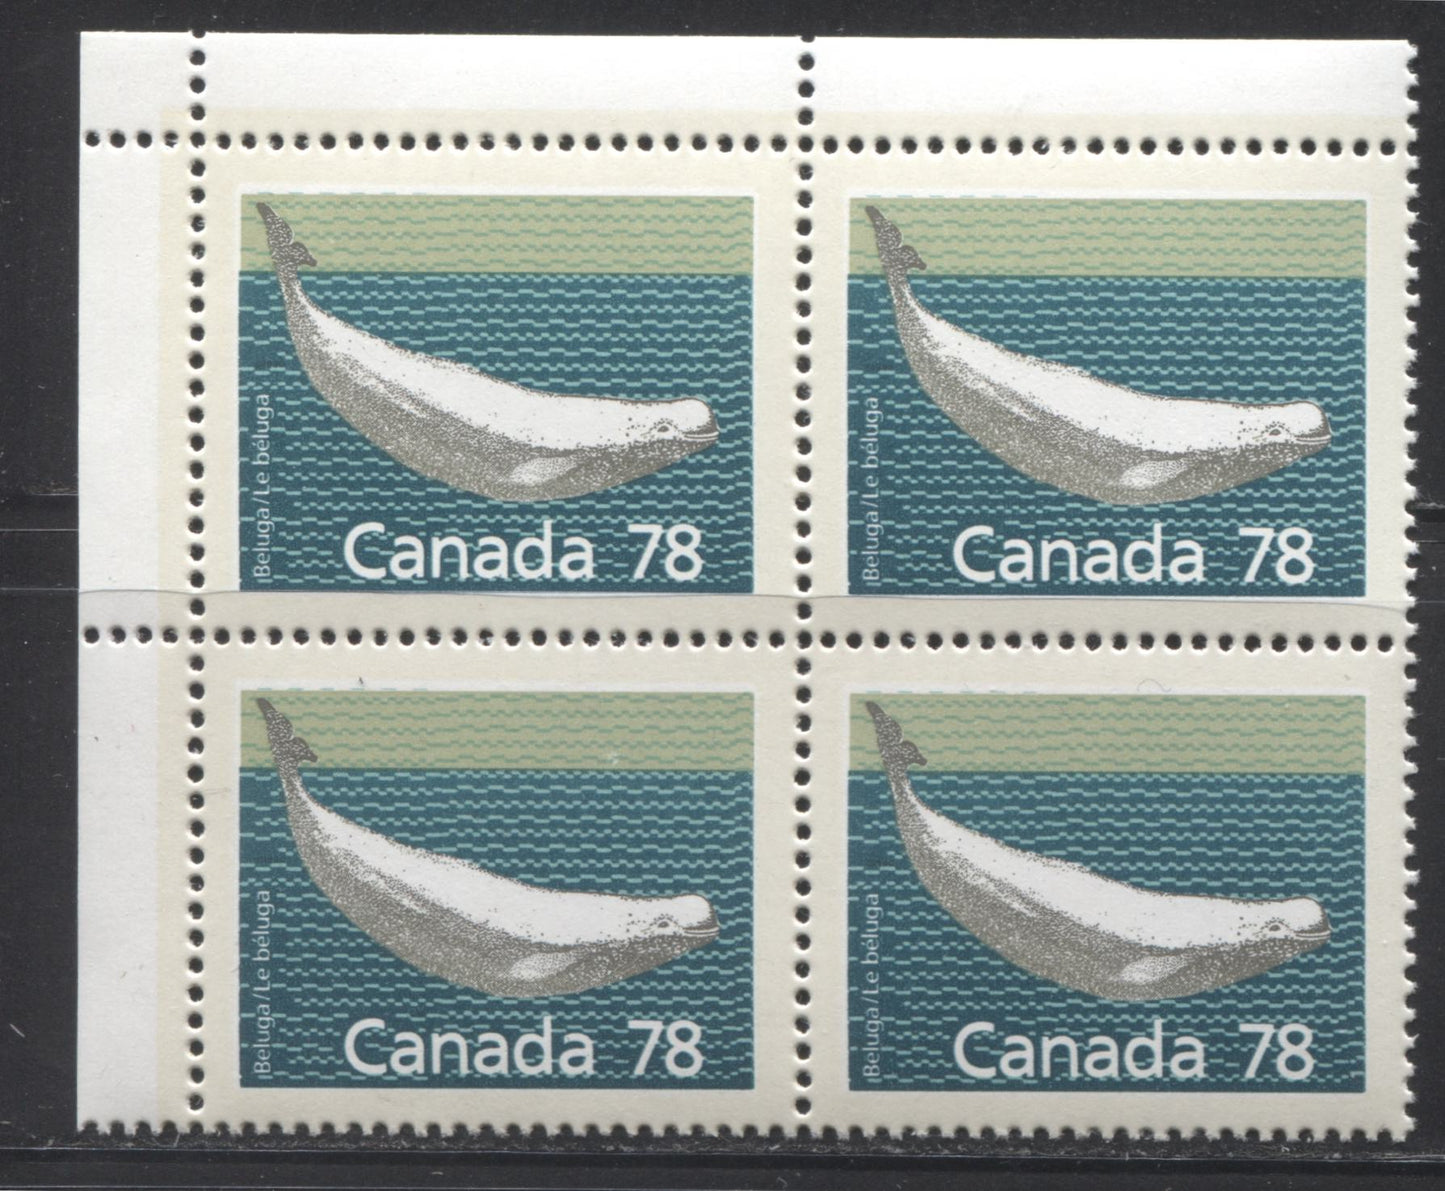 Canada #1179 78c Multicolored Beluga Whale 1988-1991 Wildlife and Architecture Issue, VFNH UL Field Stock Block on NF/NF Slater Paper